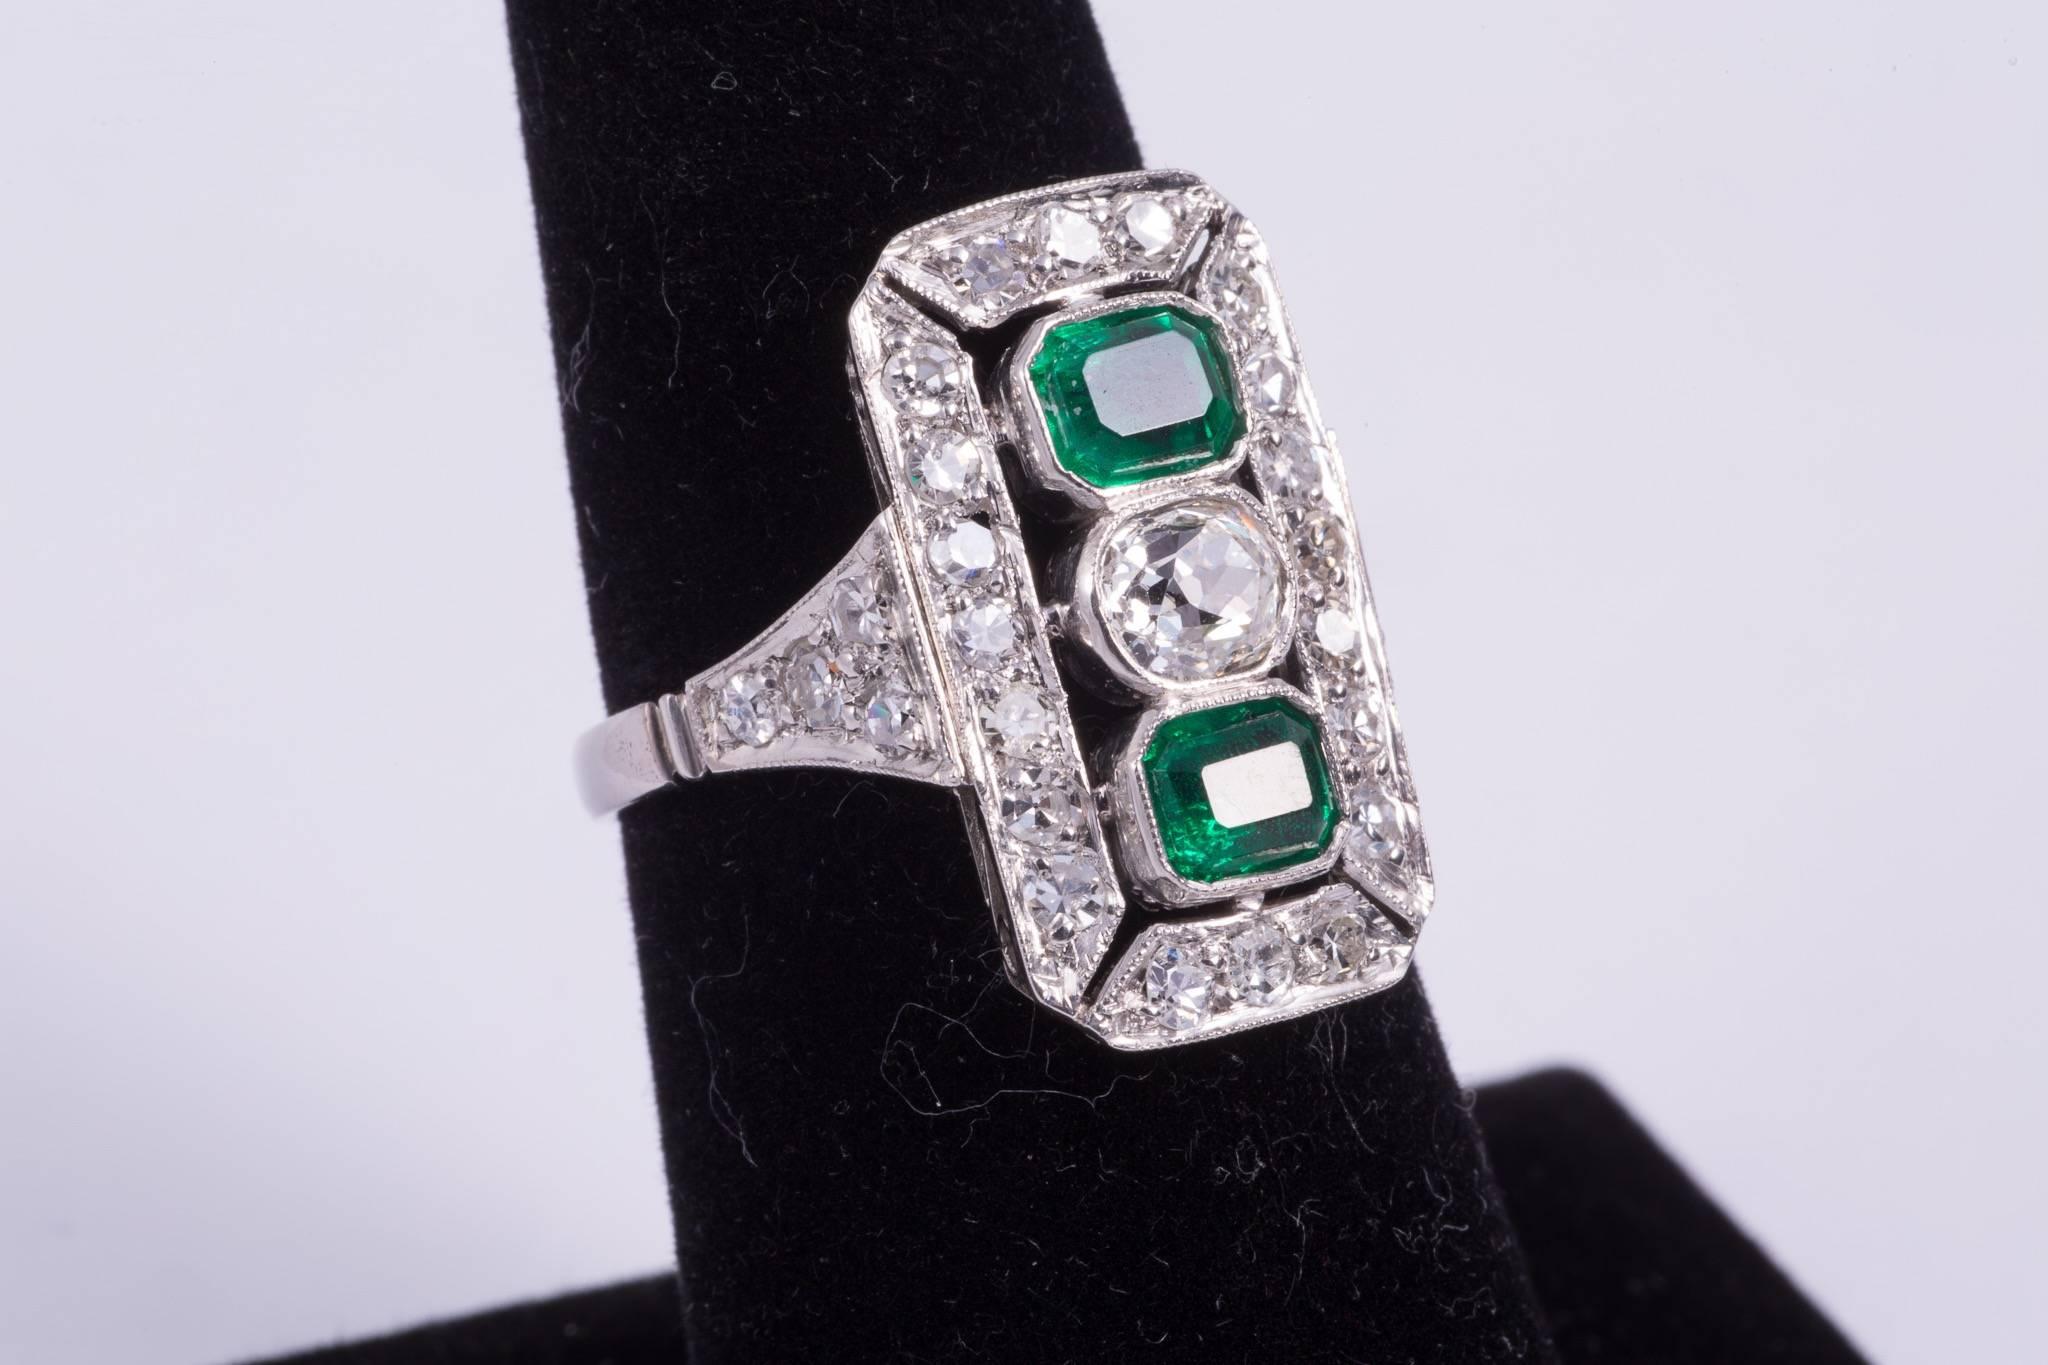 Emerald and diamond ring with two emeralds that weigh approx. 1.00cts total. The emeralds have wonderful rich green color. The diamond in the center is an approx. .50ct antique cushion cut diamond and has G-H color and VS2-SI1 clarity. There are 28